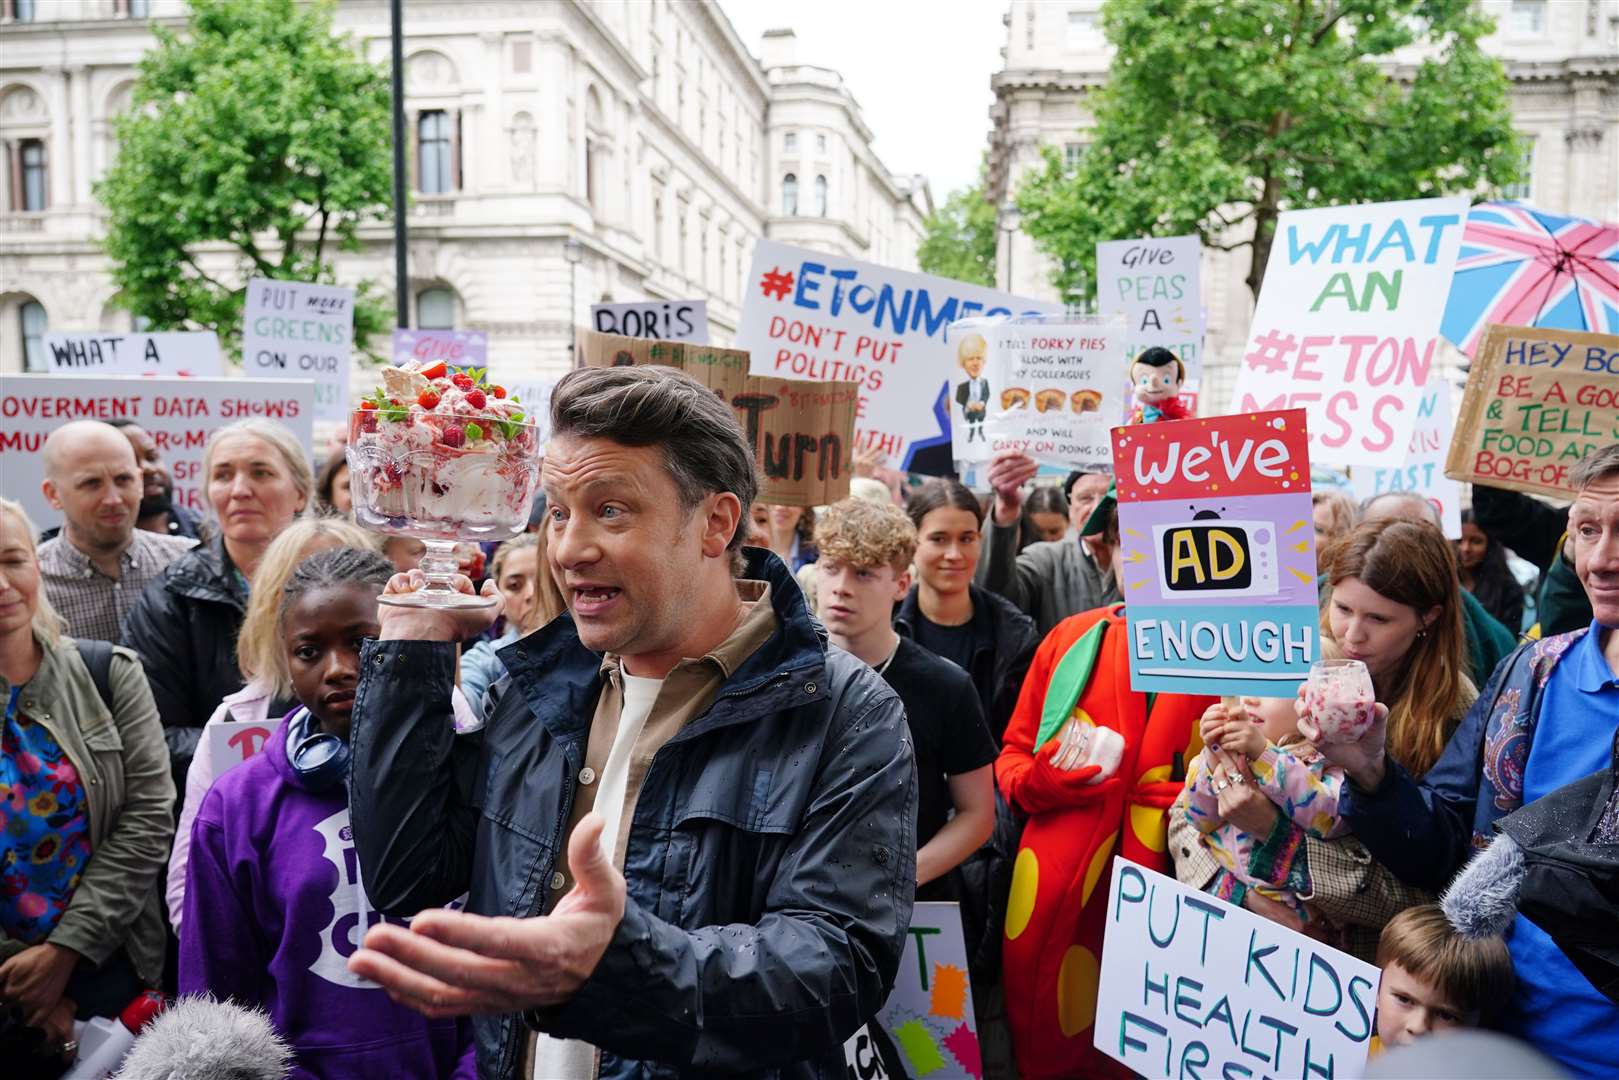 Chef Jamie Oliver takes part in the What An Eton Mess demonstration outside Downing Street (Dominic Lipinski/PA)